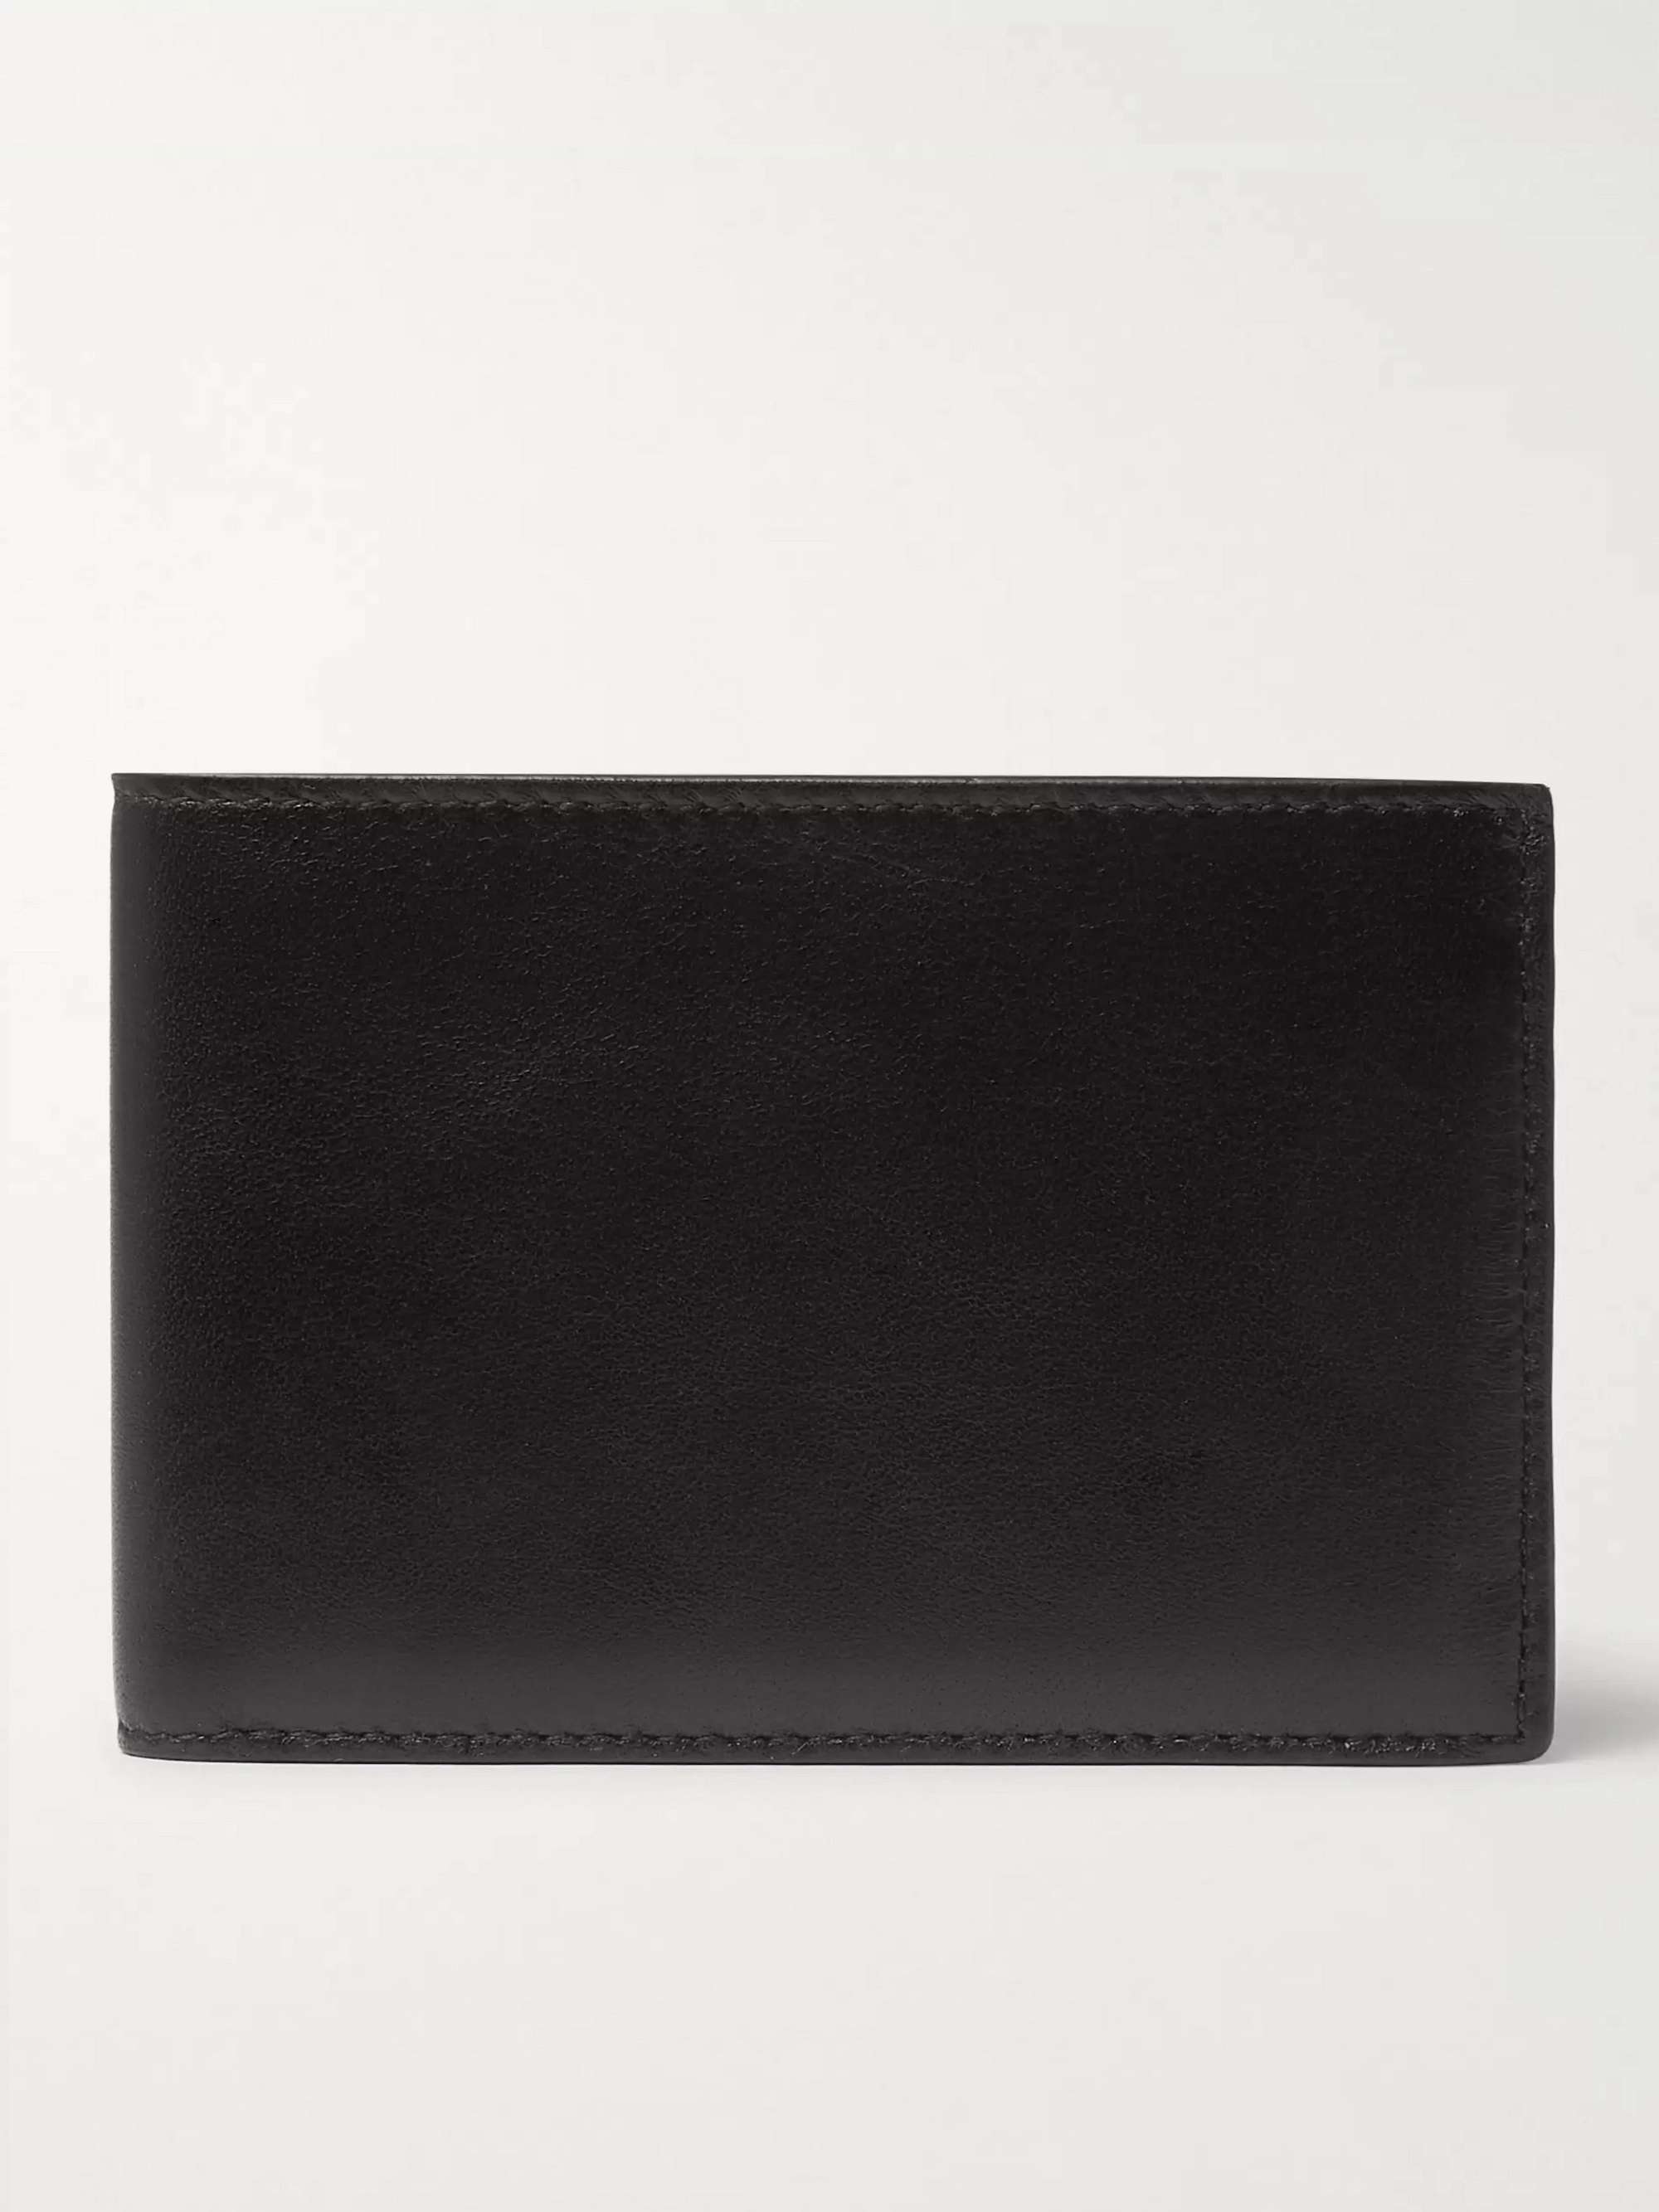 COMMON PROJECTS Full-Grain Leather Billfold Wallet